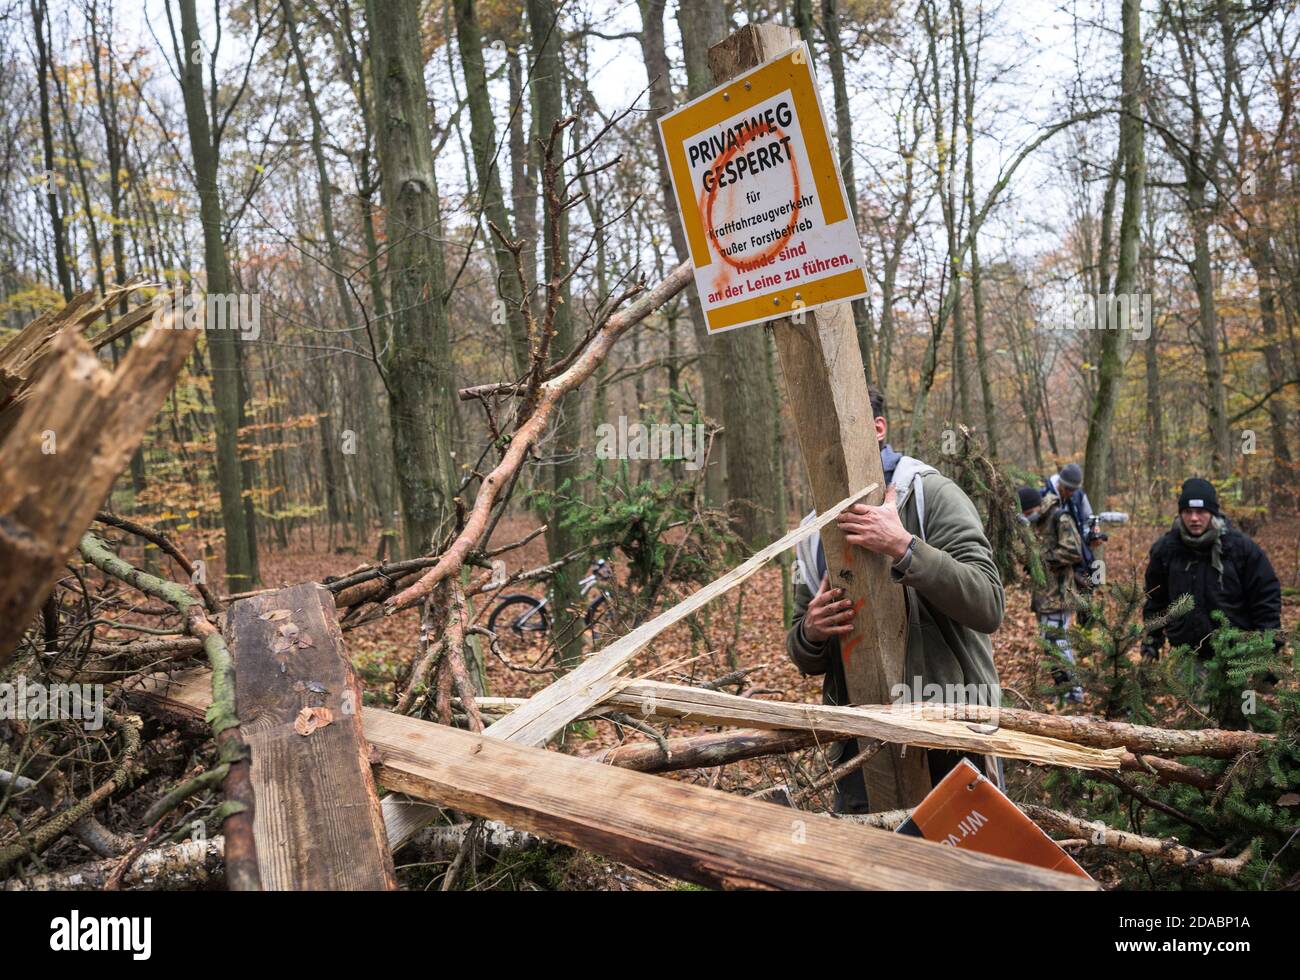 Kirtorf, Germany. 11th Nov, 2020. An activist puts up a sign 'Private road closed' in front of a barricade. Activists are currently occupying the Dannenröder Forst, demonstrating against the planned expansion of the Autobahn 49 (A49) and for the preservation of the forest area that would fall victim to the planned expansion. The police expect massive resistance to the imminent clearing of the Dannenröder Forst. Credit: Andreas Arnold/dpa/Alamy Live News Stock Photo